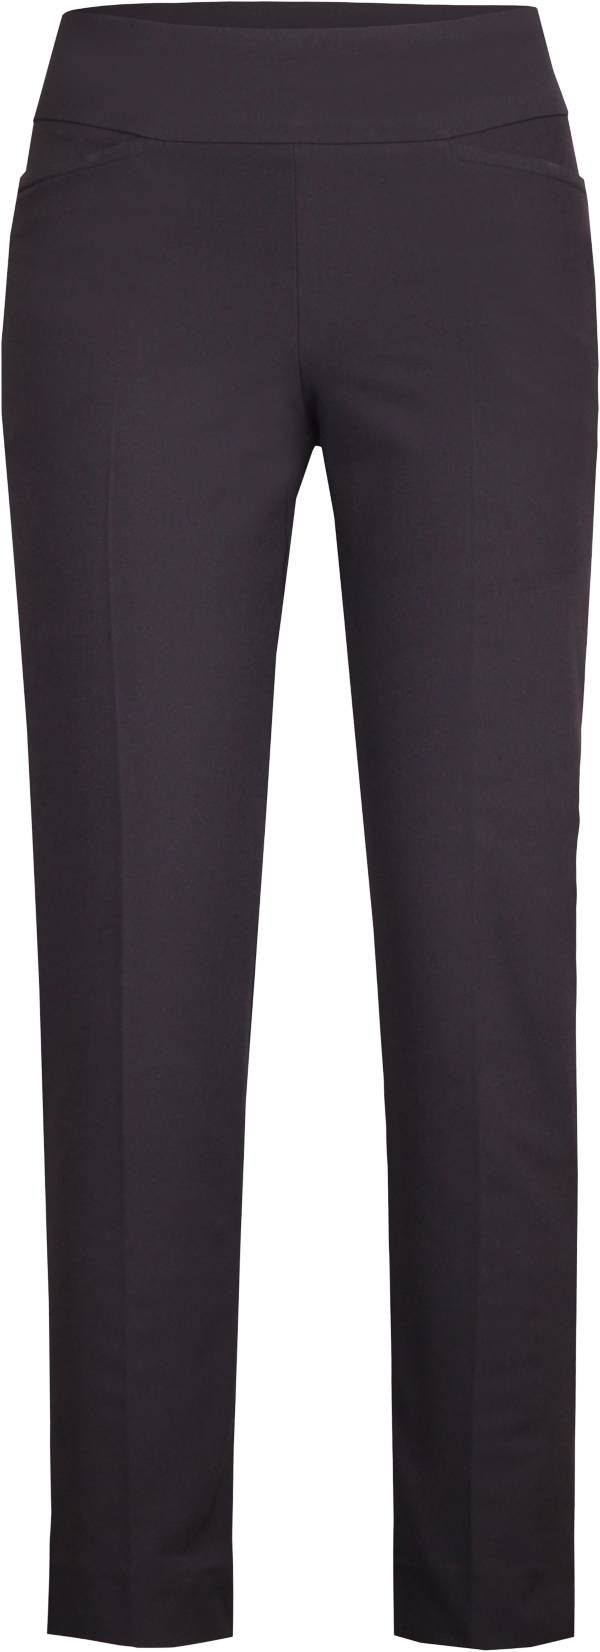 Tail Women's Mulligan Ankle Pants product image